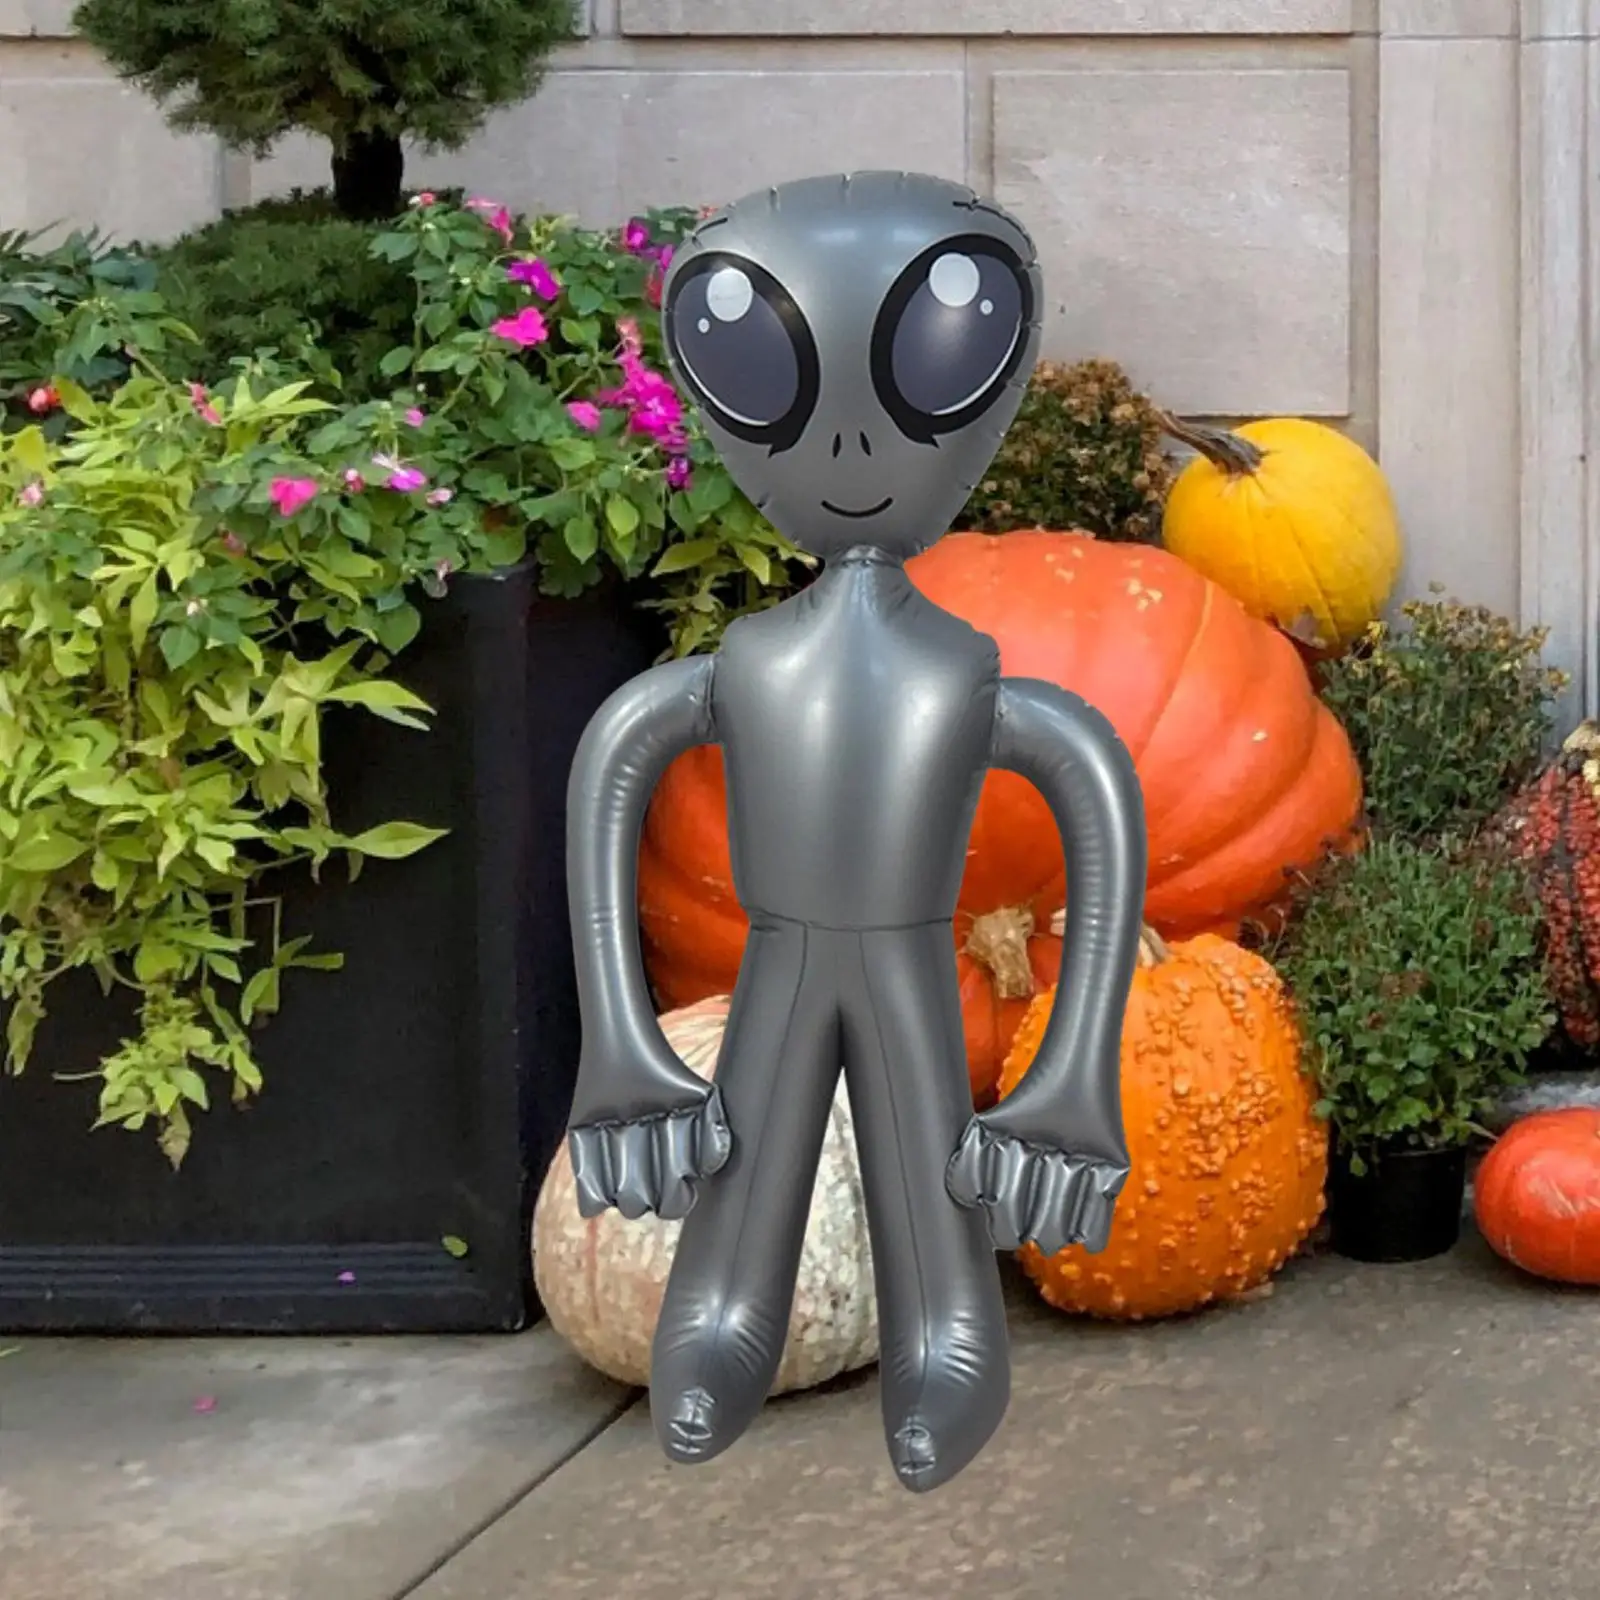 Inflatable Alien Figures Props Inflate Toy for Alien Theme Parties